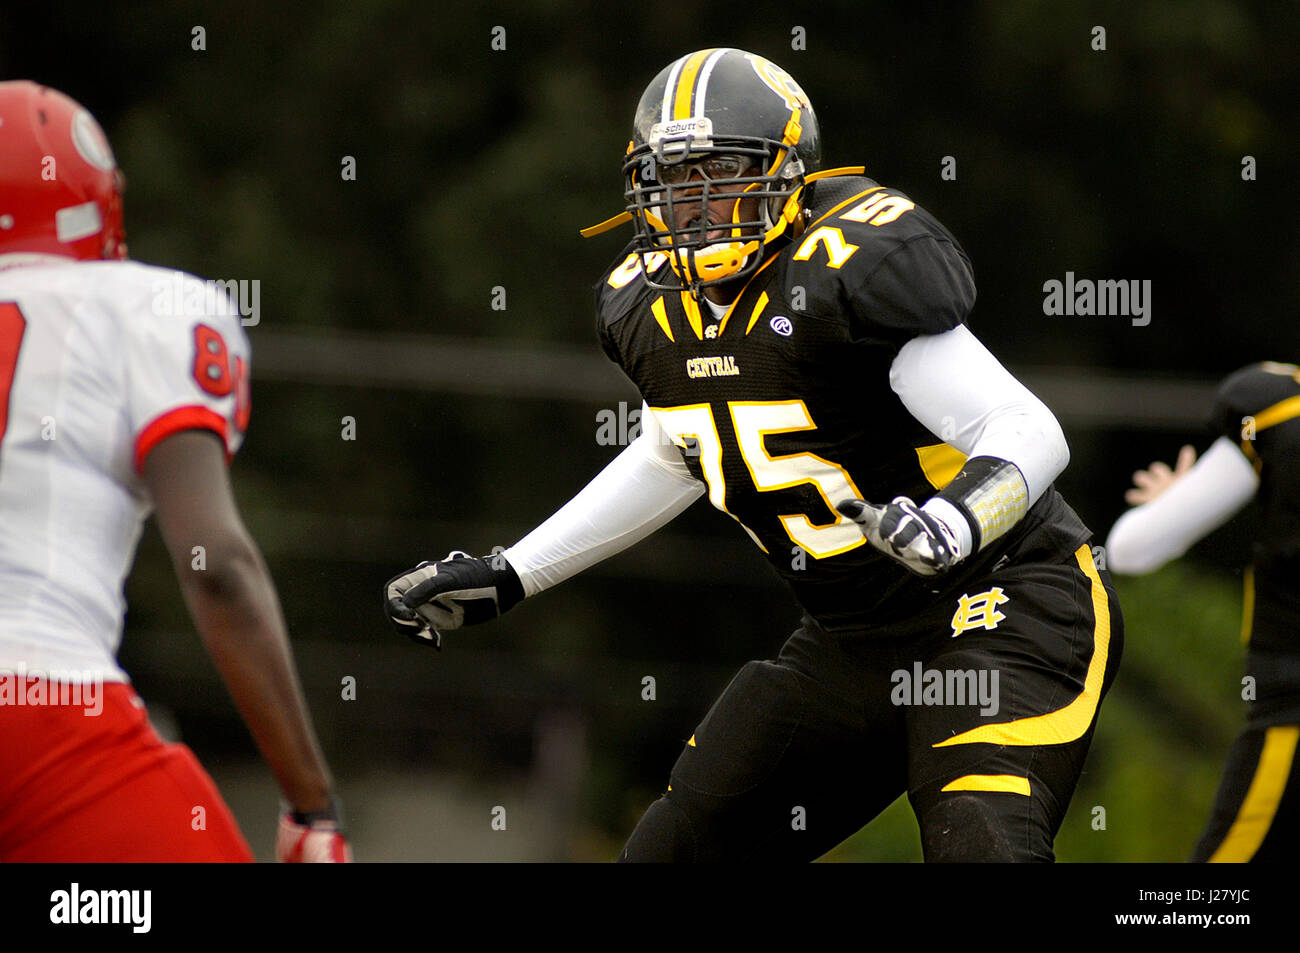 National Football League offensive line prospect Roderick Johnson (75) competes as a high school player for Hazelwood Central High School. Stock Photo